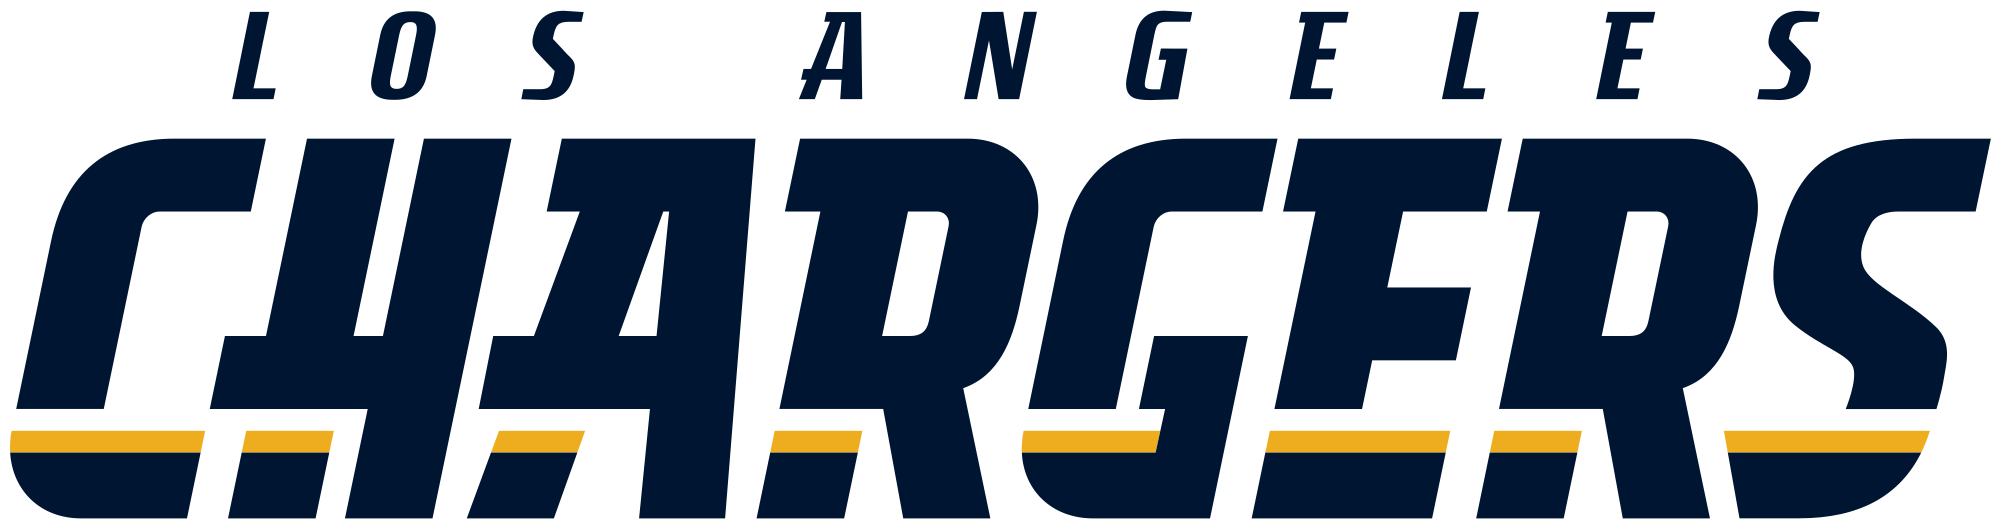 Chargers Football Logo - Los Angeles Chargers wordmark.svg